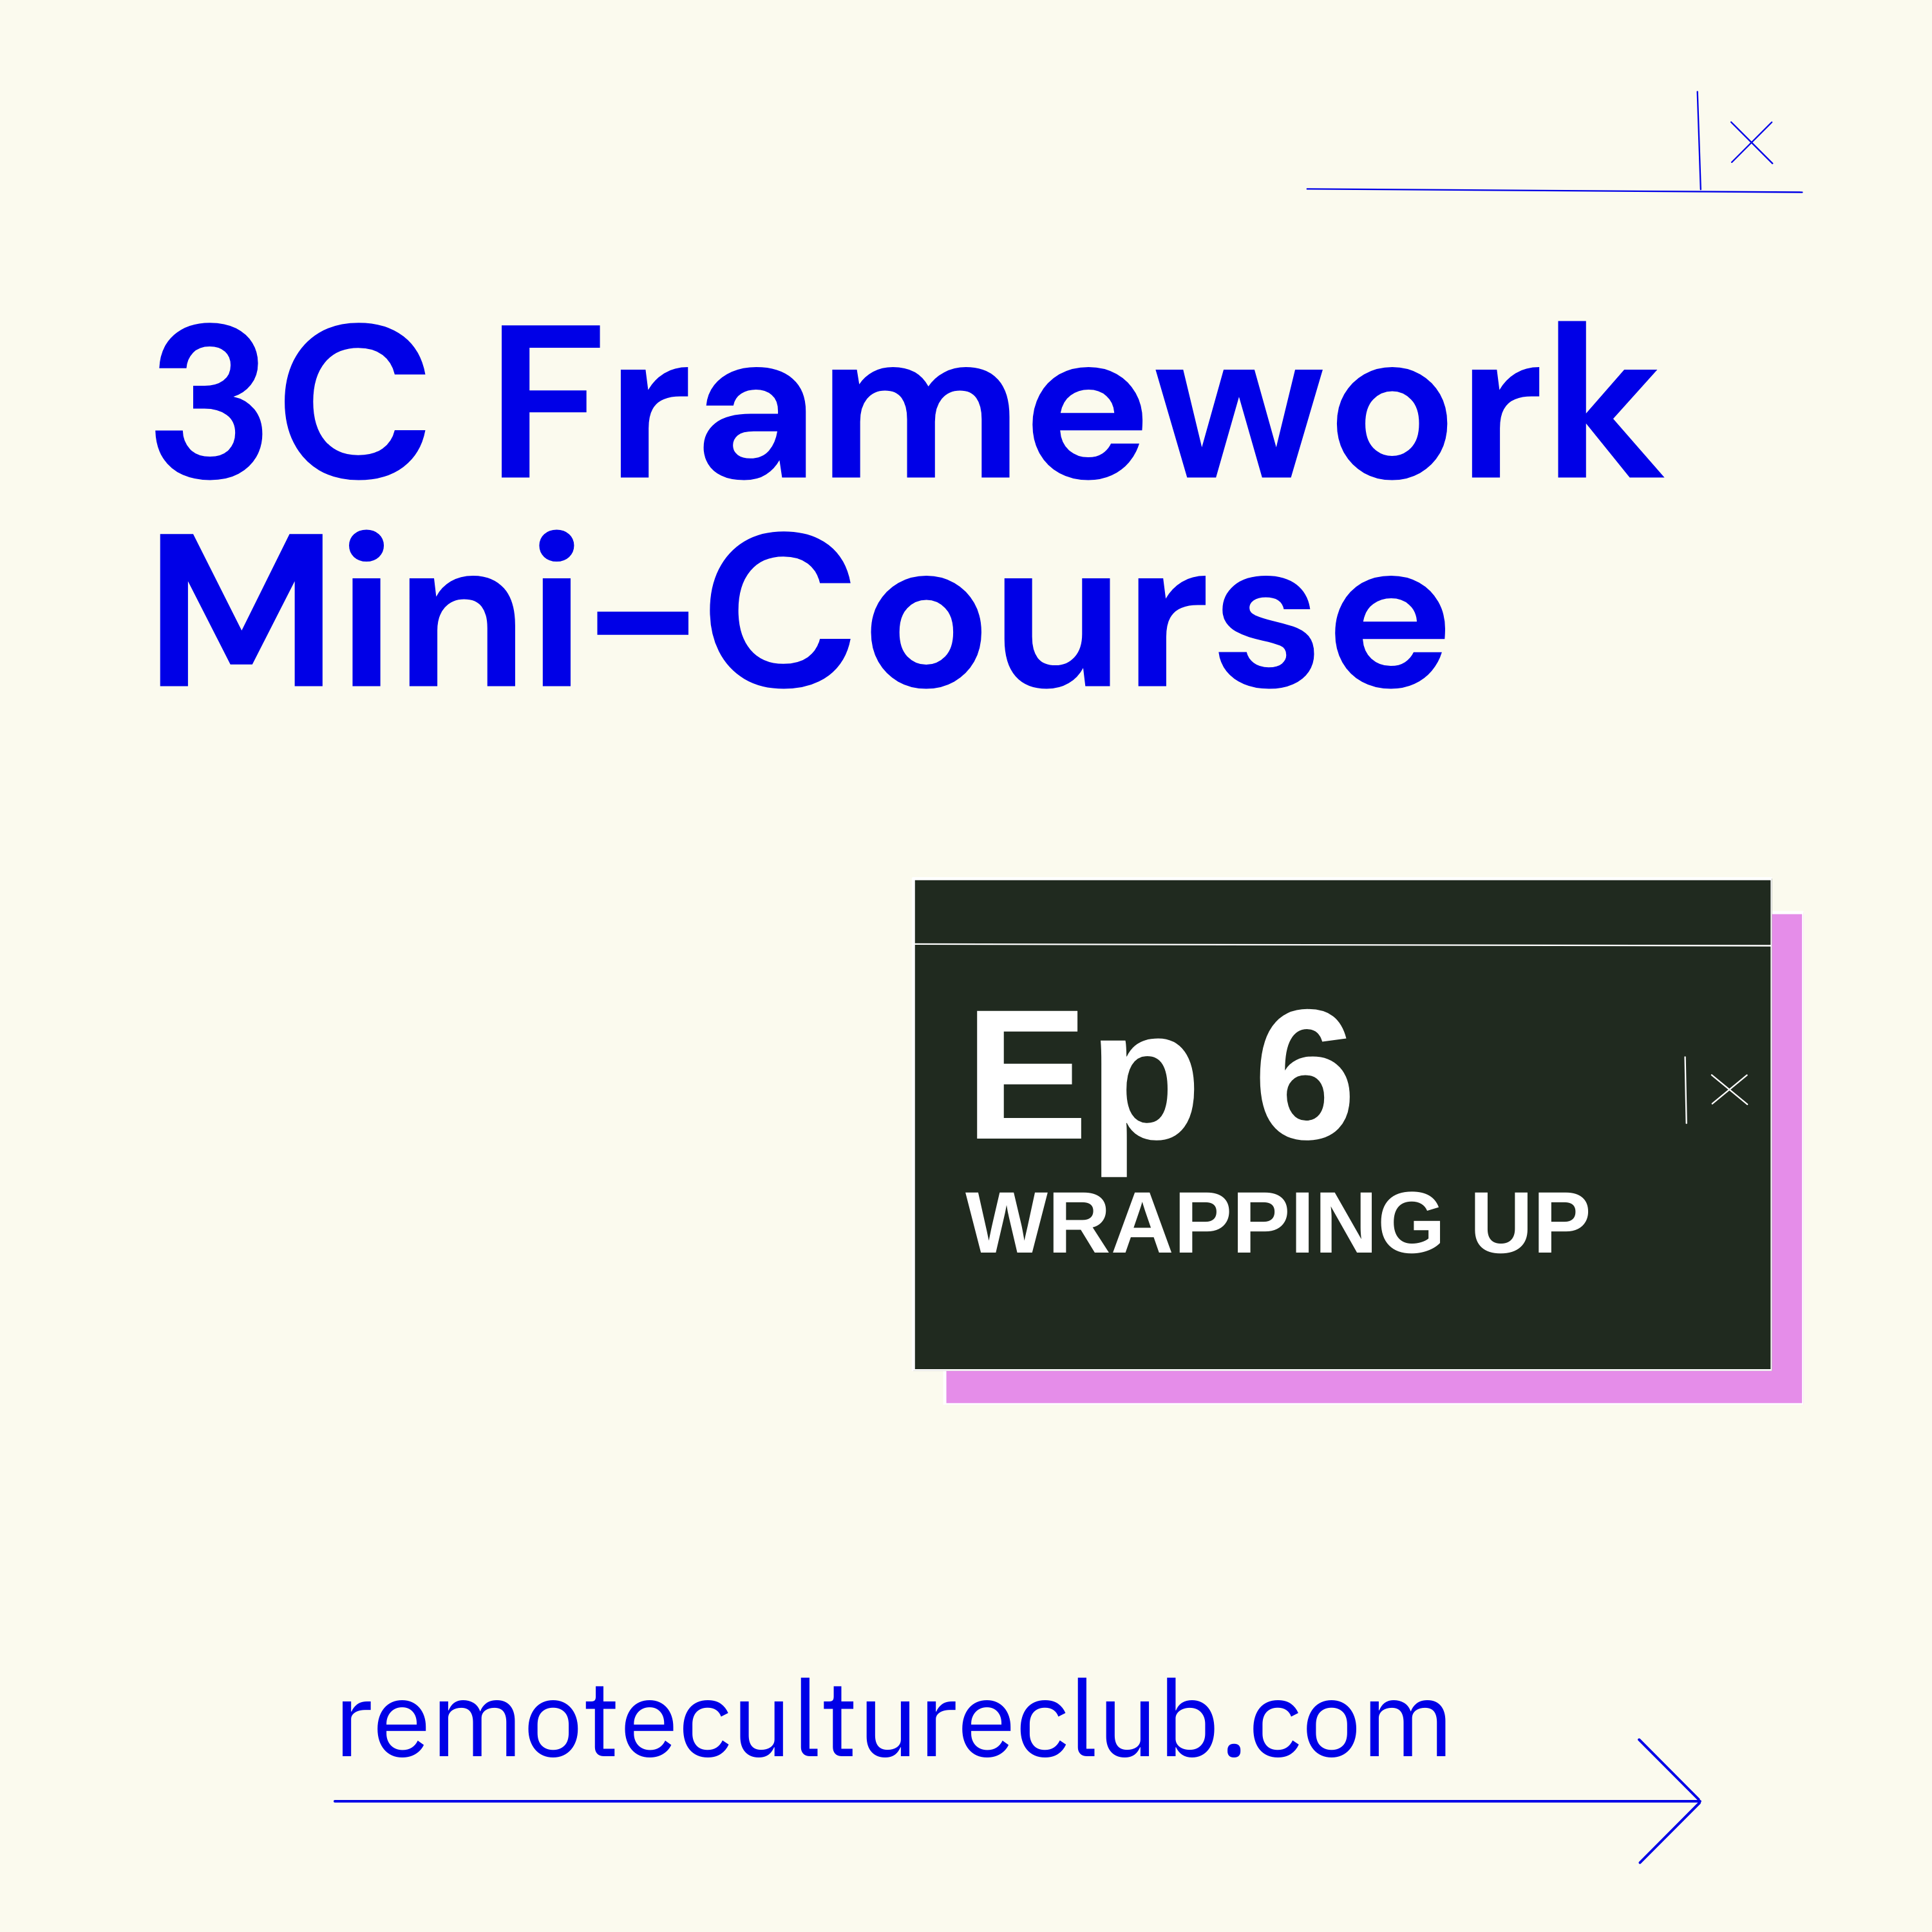 3C Framework Mini-Course: Wrapping up